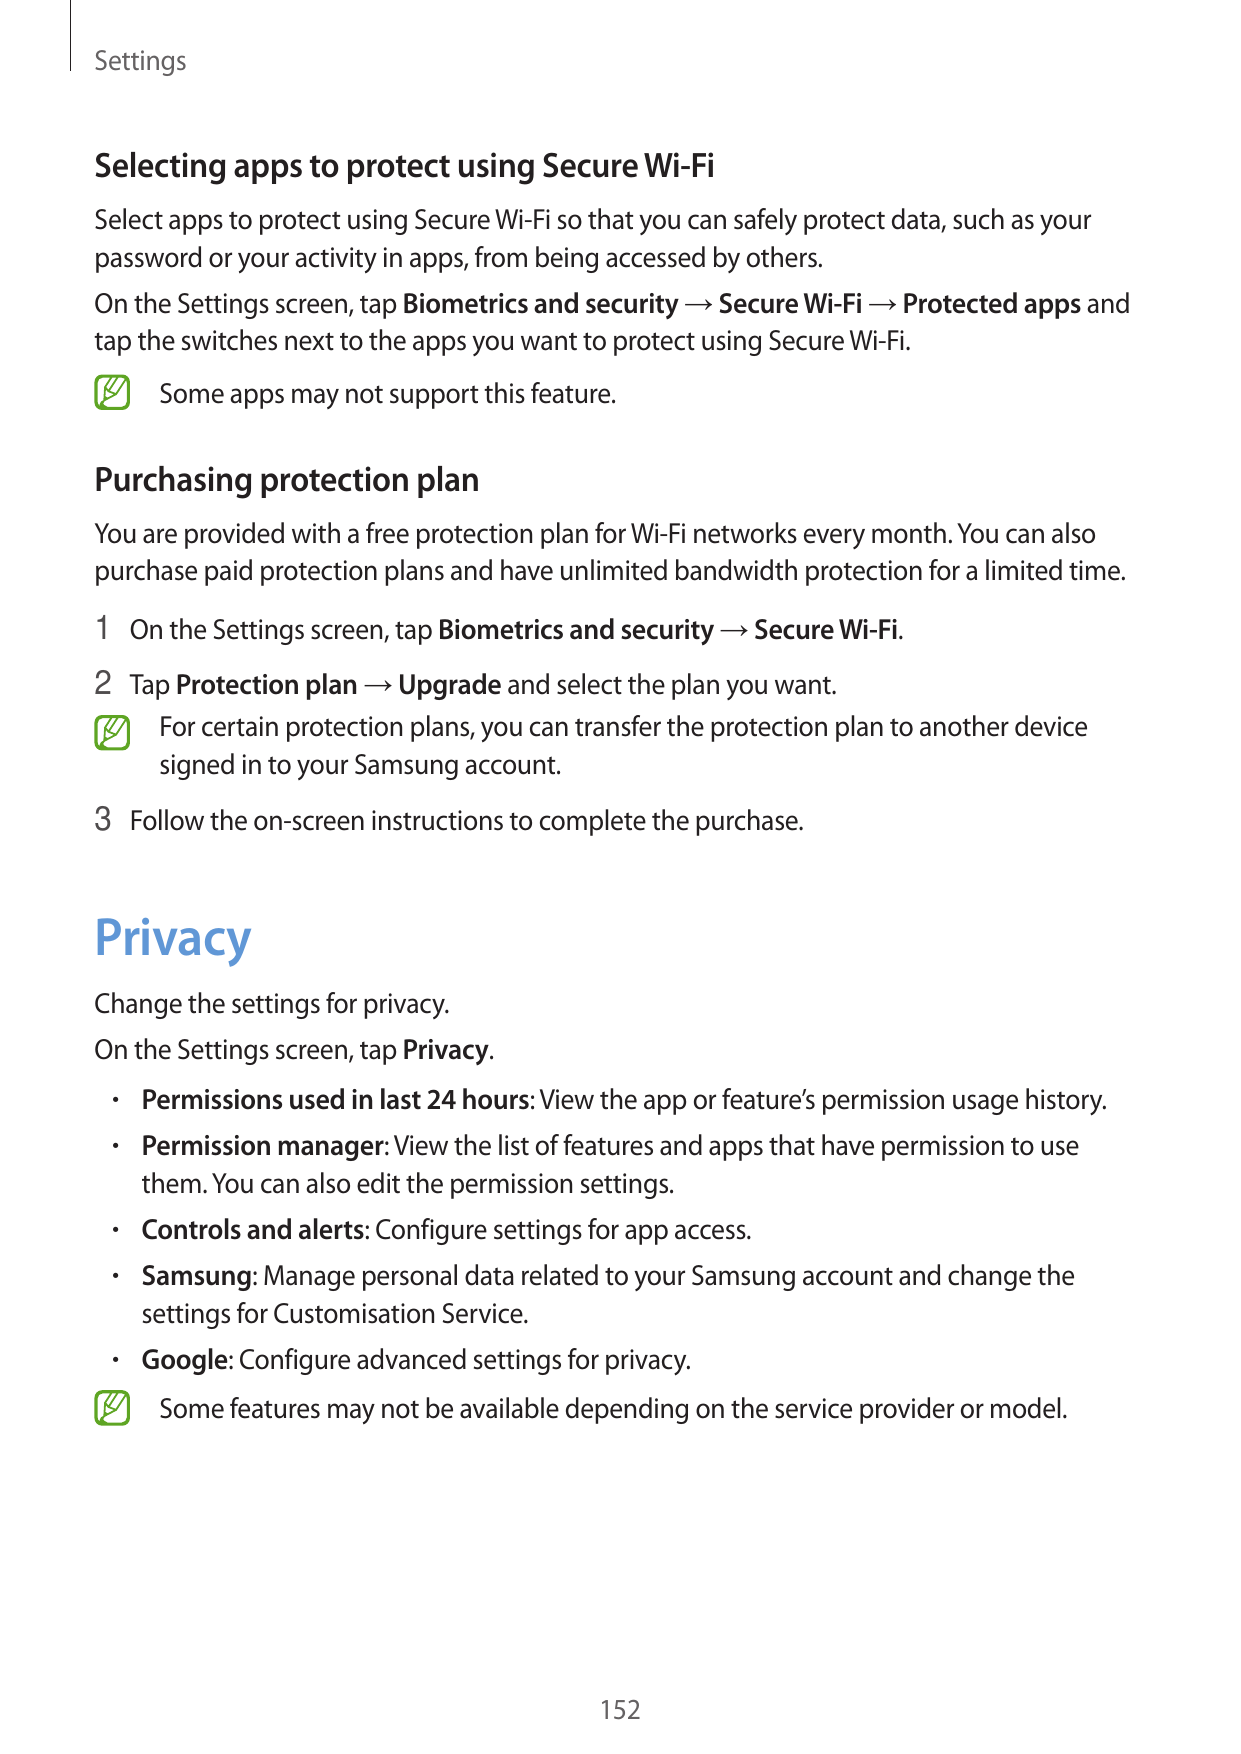 SettingsSelecting apps to protect using Secure Wi-FiSelect apps to protect using Secure Wi-Fi so that you can safely protect dat